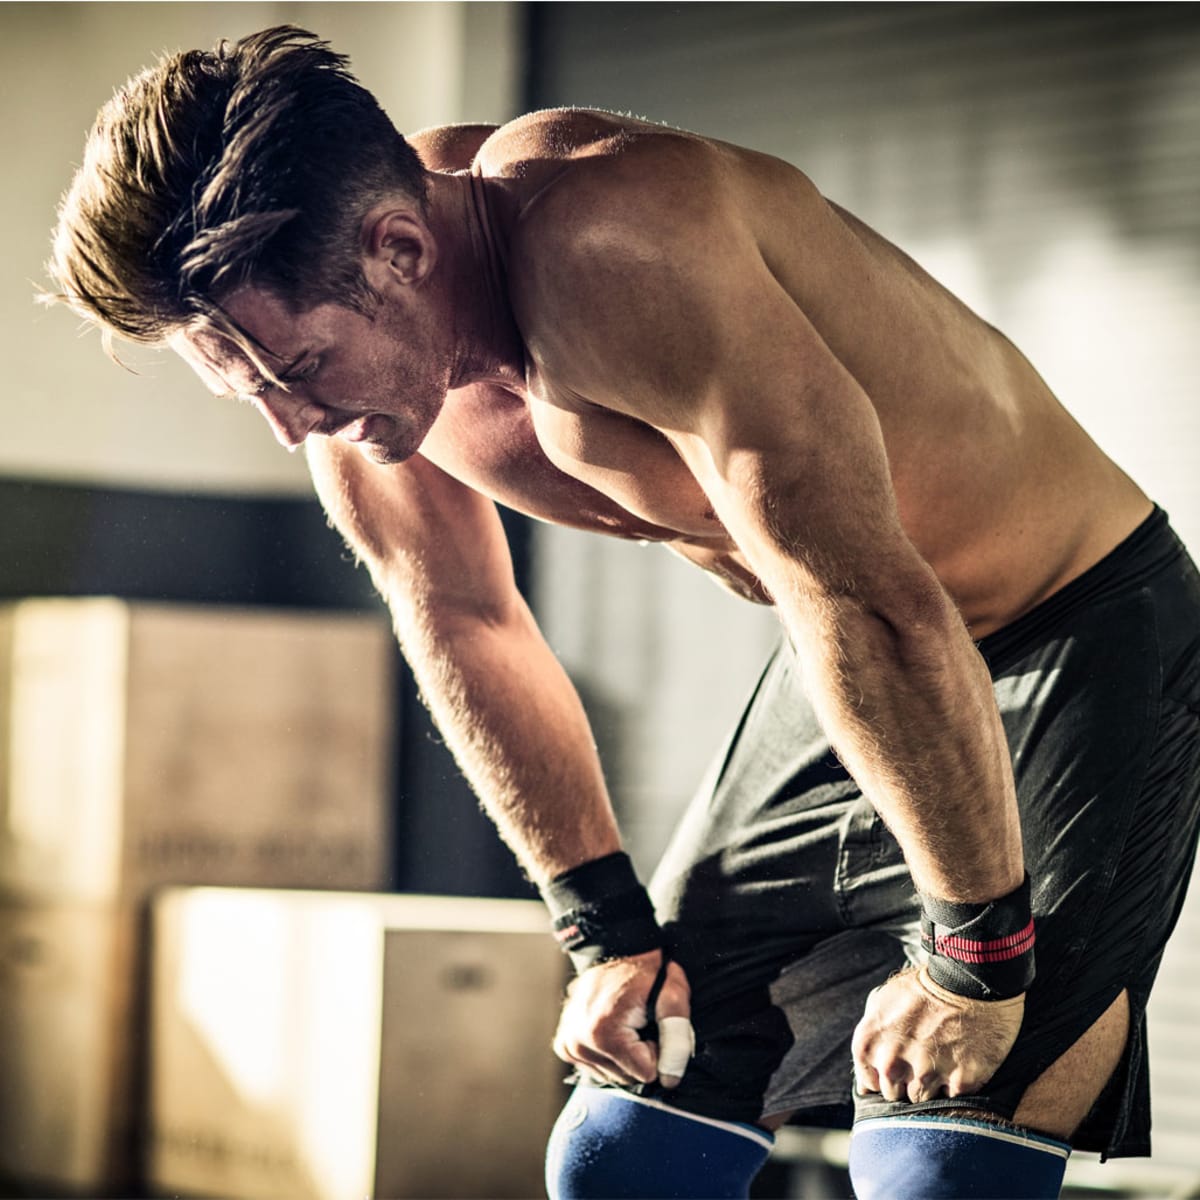 5 ways to get your full workout in a packed gym